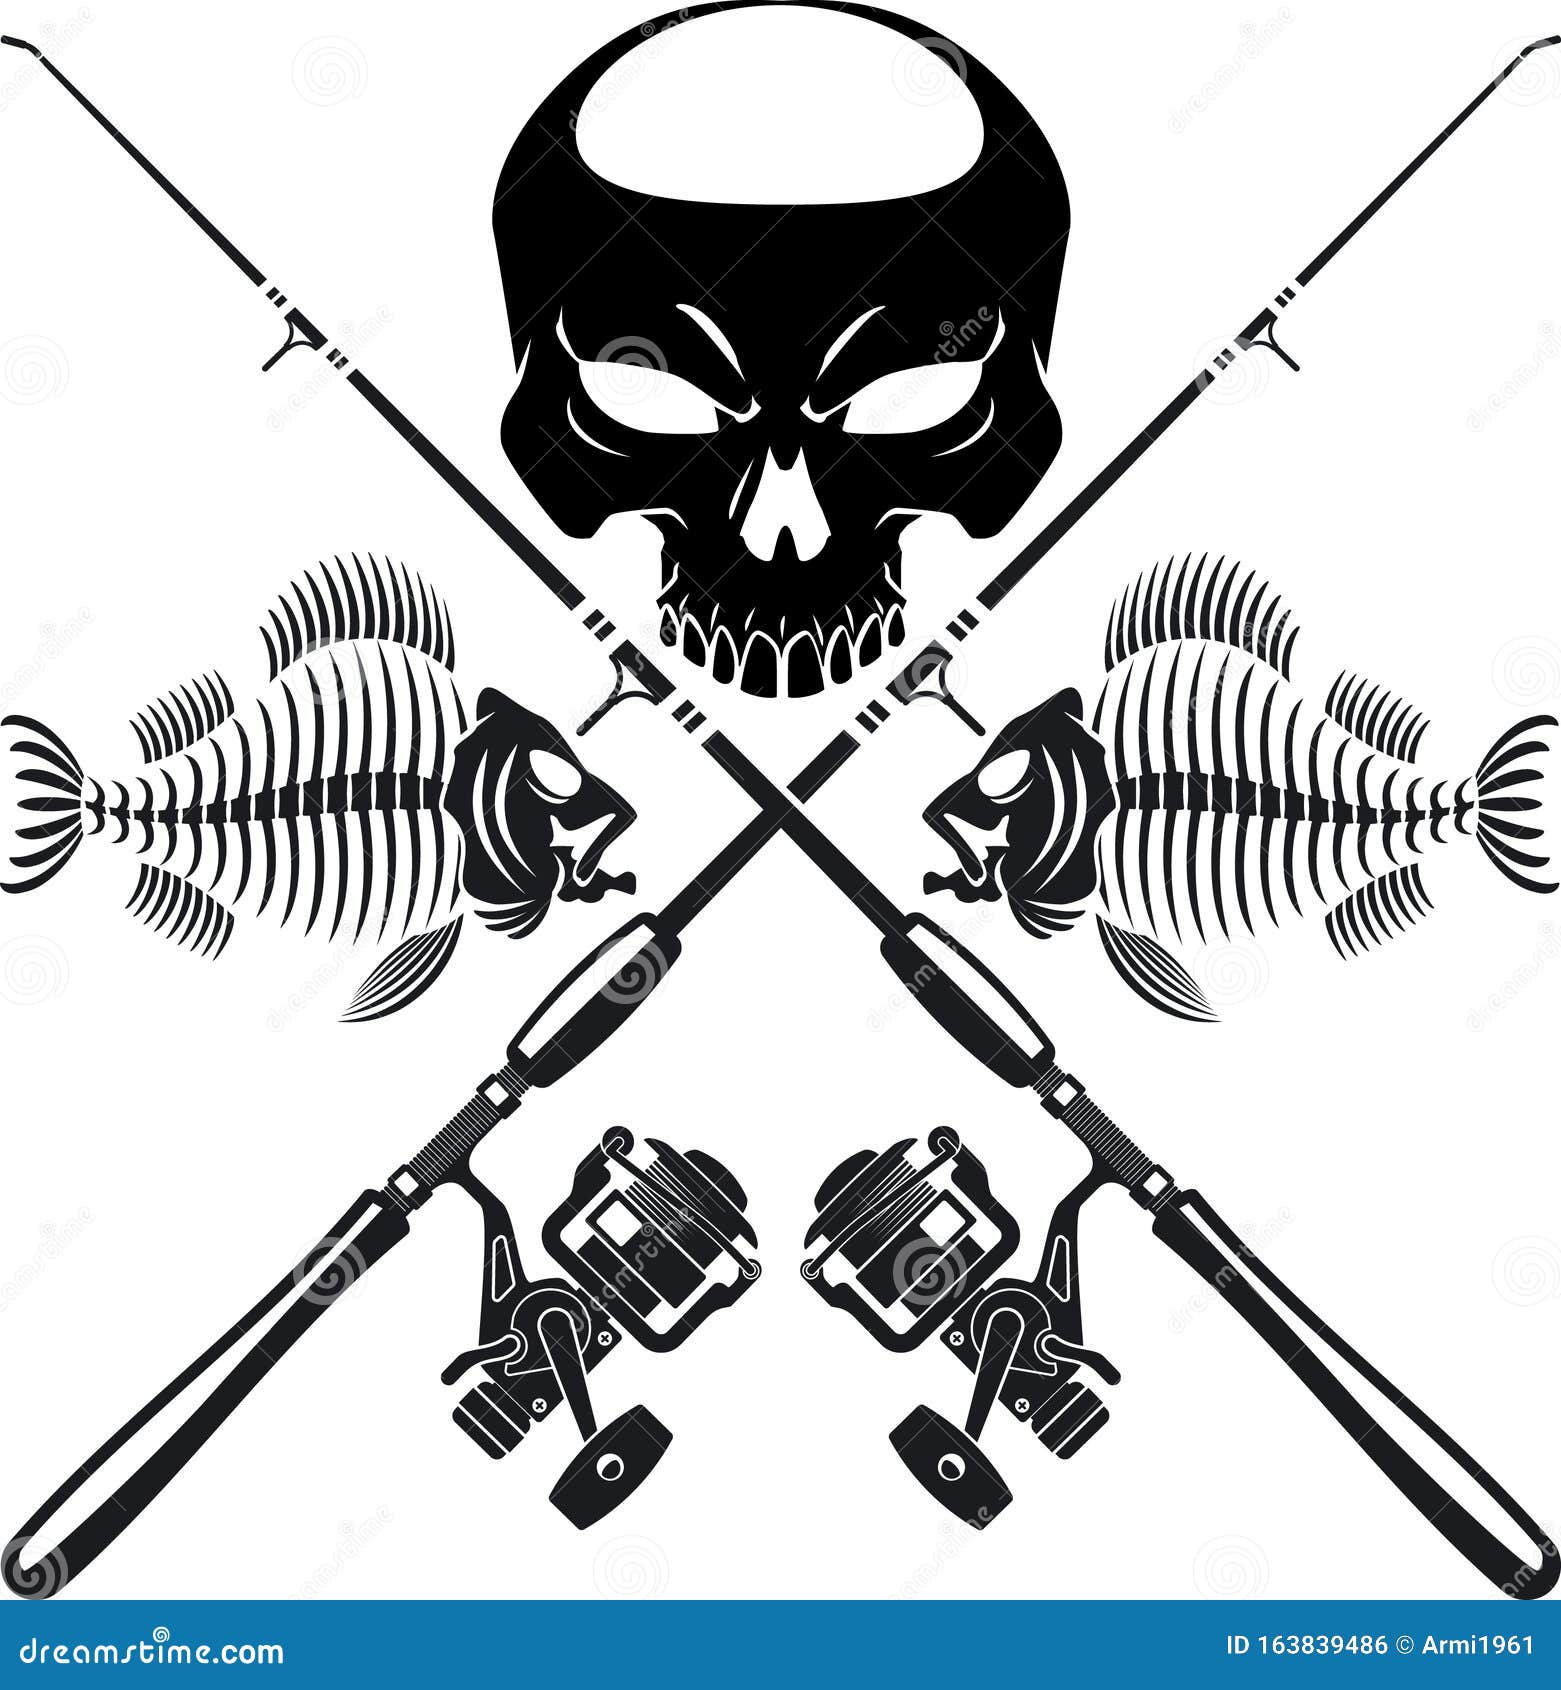 Human Skull, Crossing Fishing Rods and Skeleton Fish Stock Vector -  Illustration of ghost, grim: 163839486